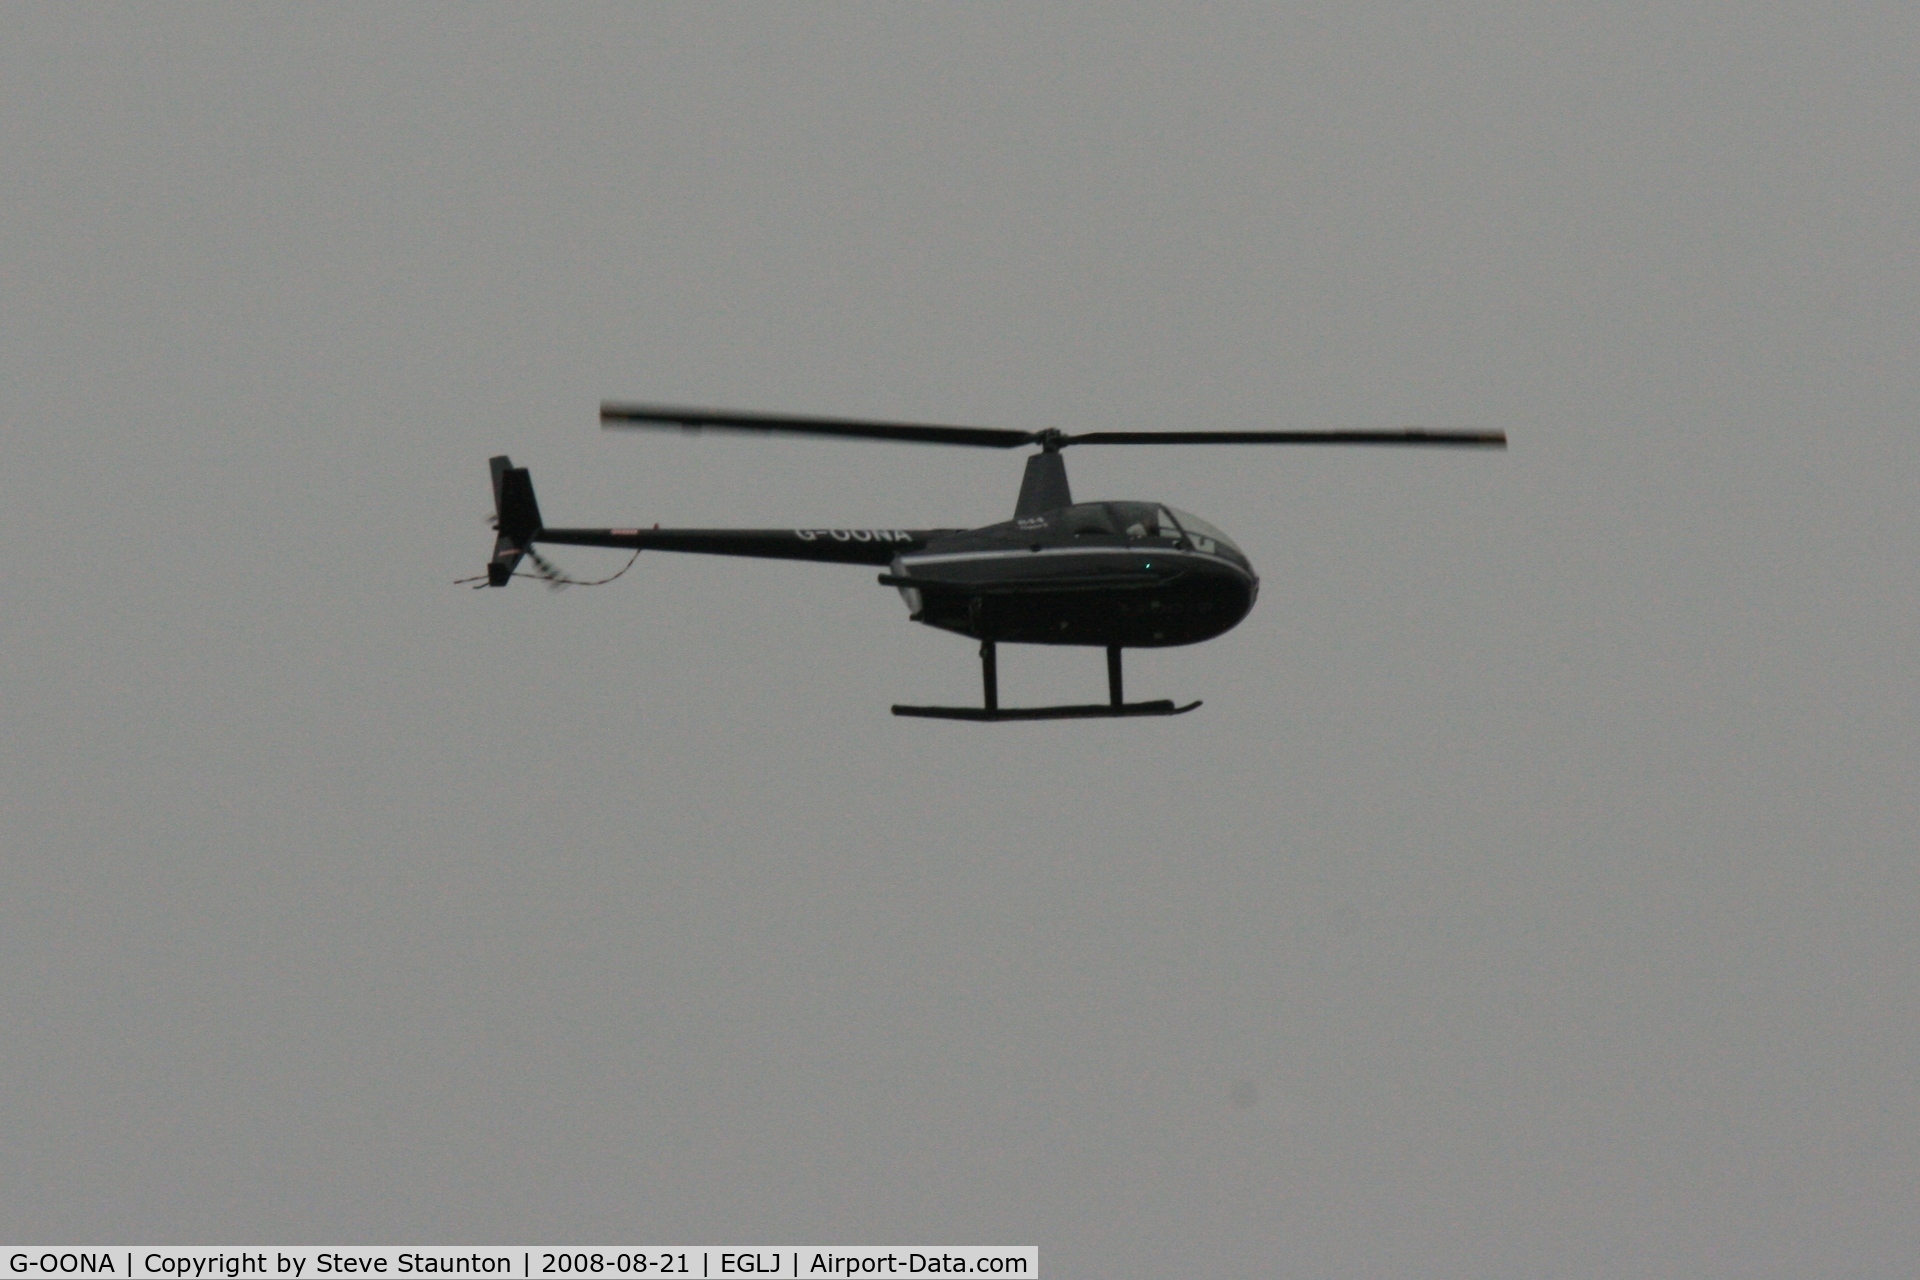 G-OONA, 2005 Robinson R44 Clipper II C/N 10907, Taken whilst over flying Chalgrove Airfield (EGLJ)